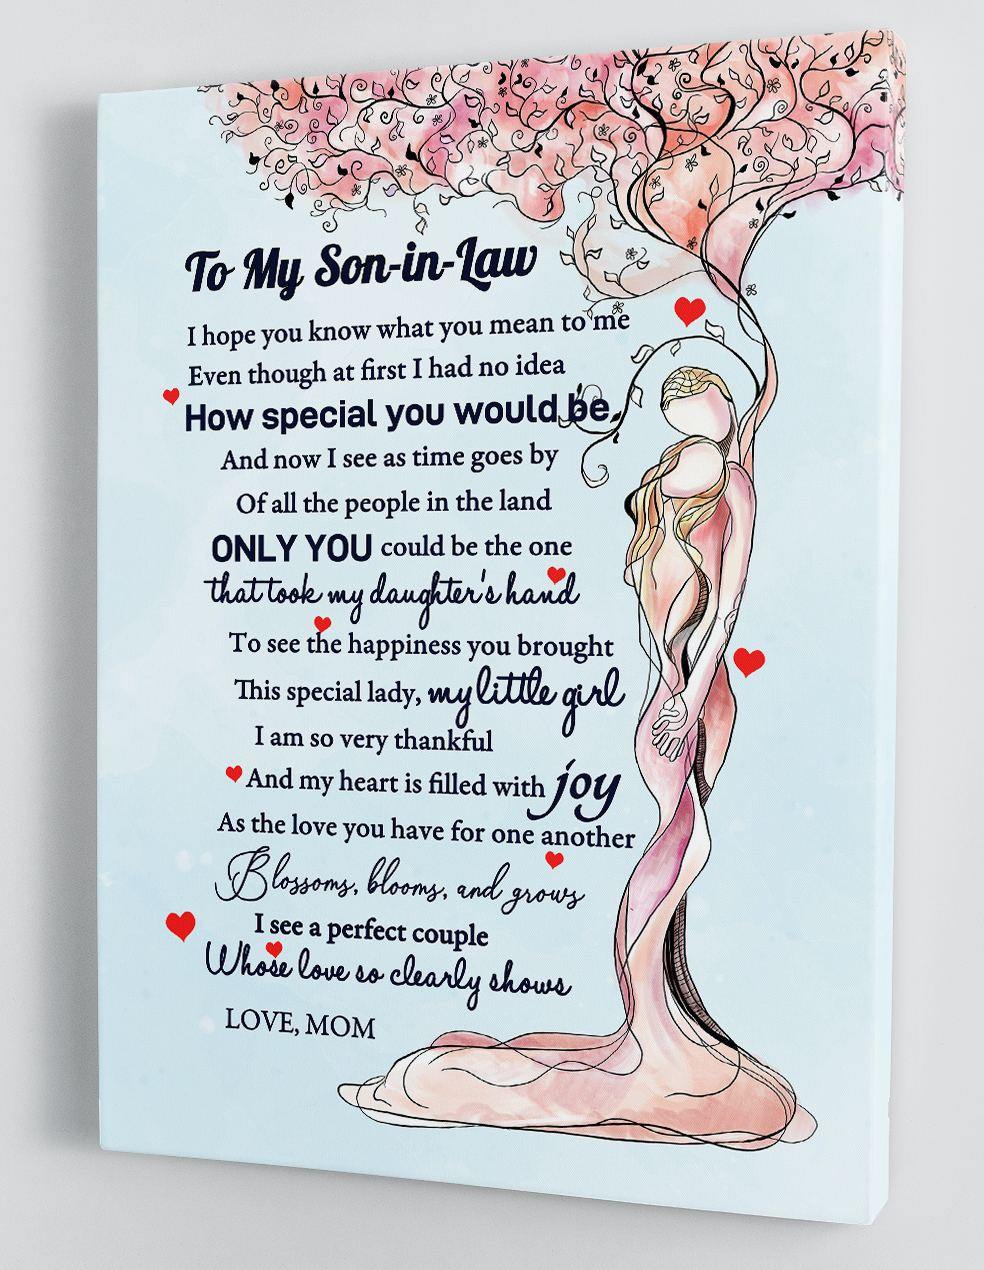 To My Son-in-Law - From Mother-in-Law - Framed Canvas Gift MS008 - DivesArt LLC